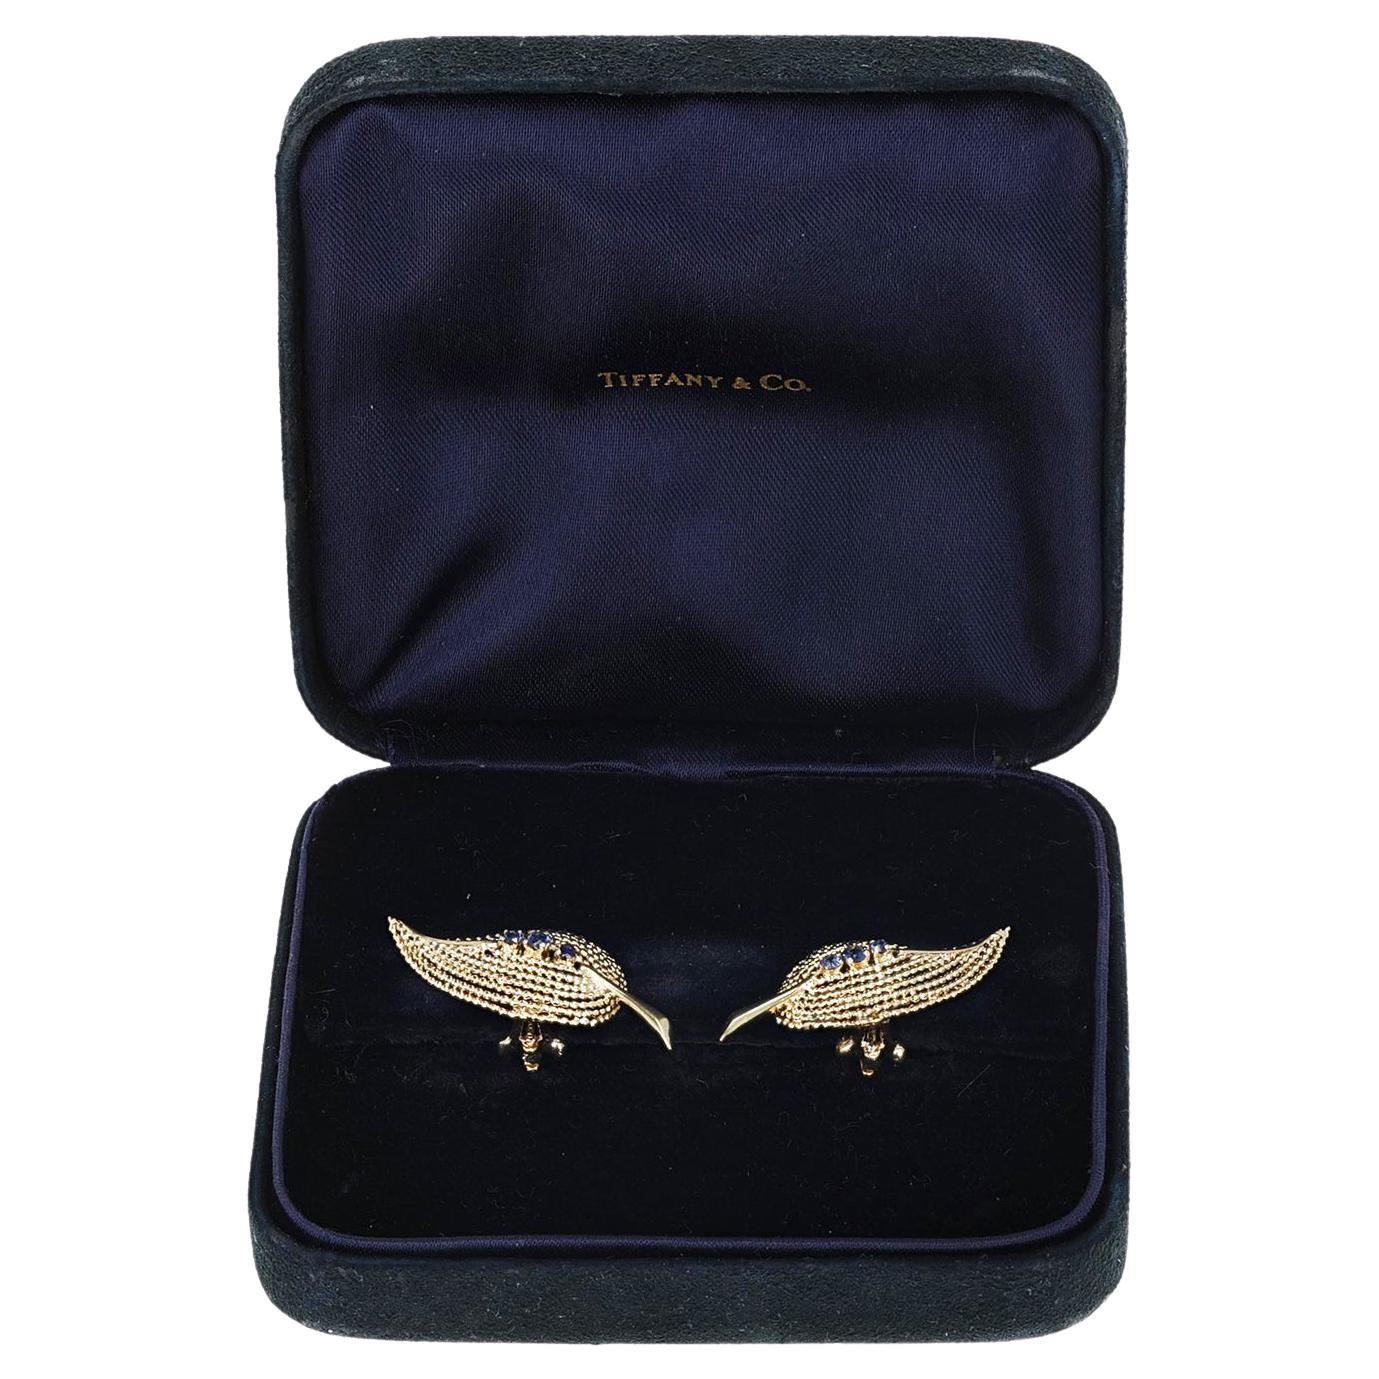 A pair of beautiful Tiffany & Co. Leaf 14k Gold and Sapphire Earrings. The earrings comes with a Tiffany & Co. Box. The total weight of the earrings is 7.30 grams. Horizontally, the earring is 1.50 inches. The earrings are clip-ons. 

